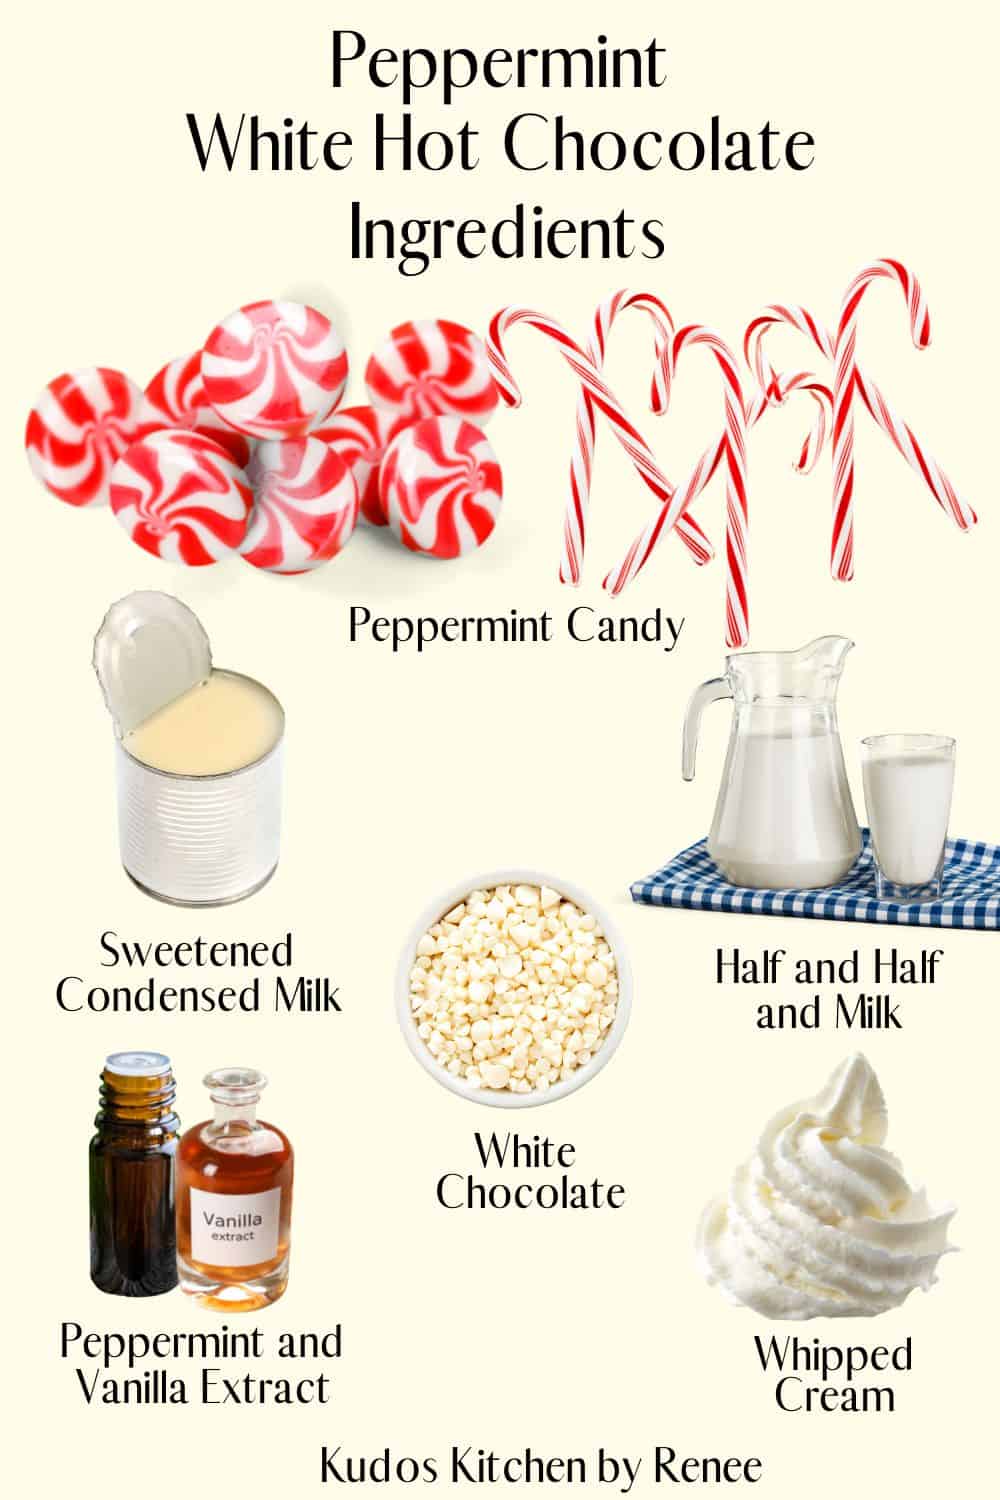 Visual ingredient list for making Peppermint White Hot Chocolate.